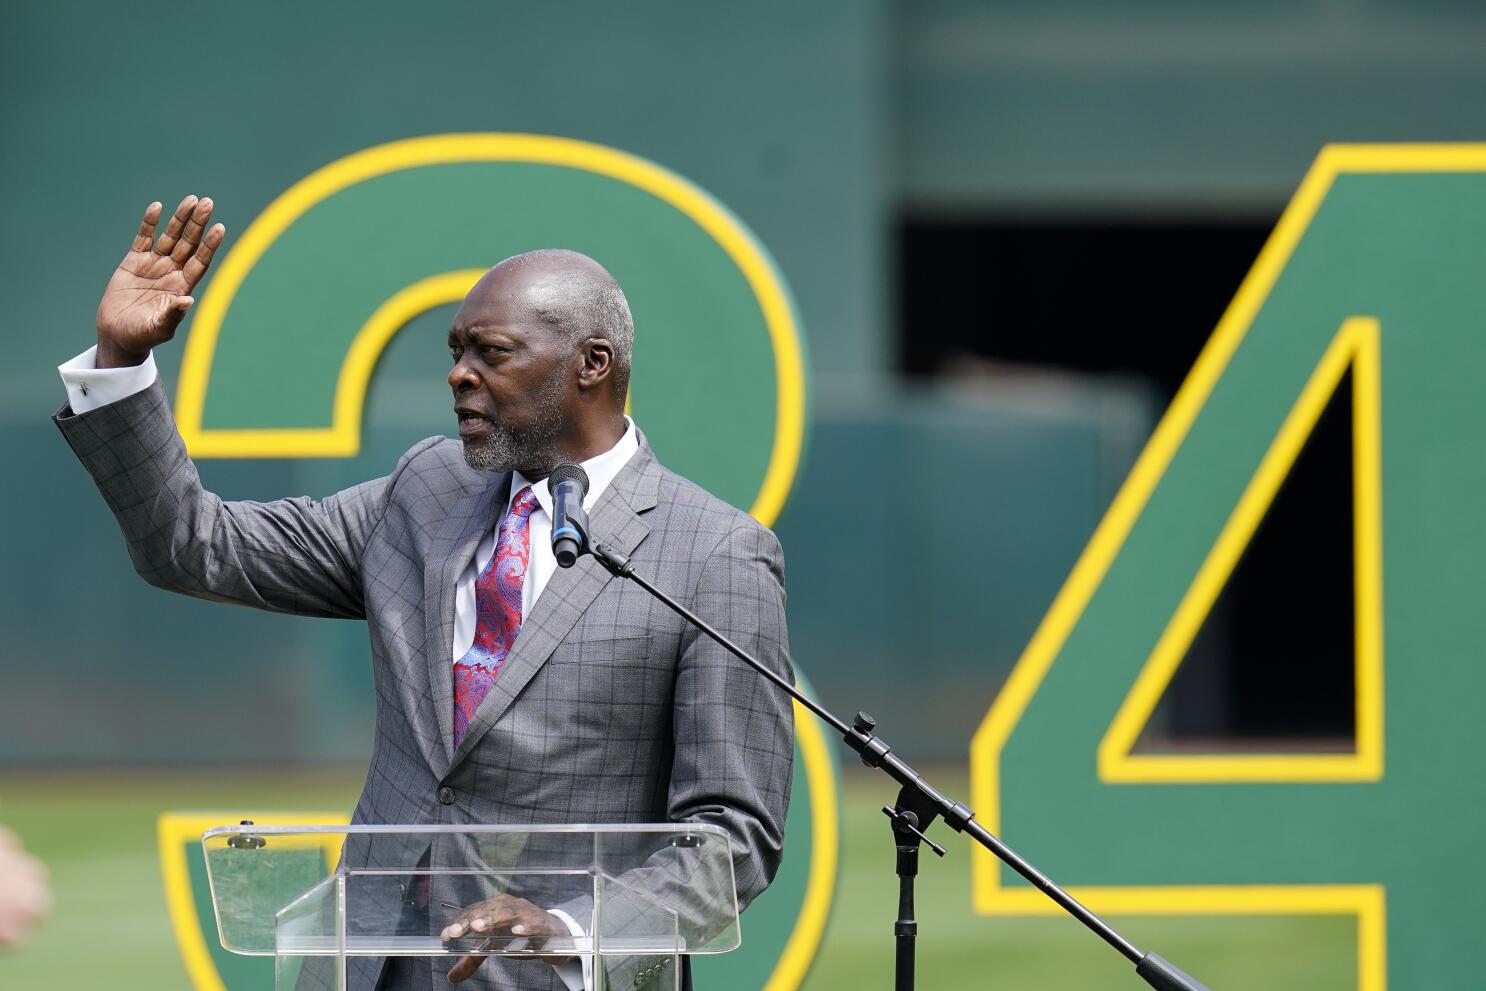 Dave Stewart still waiting for number to be retired by A's